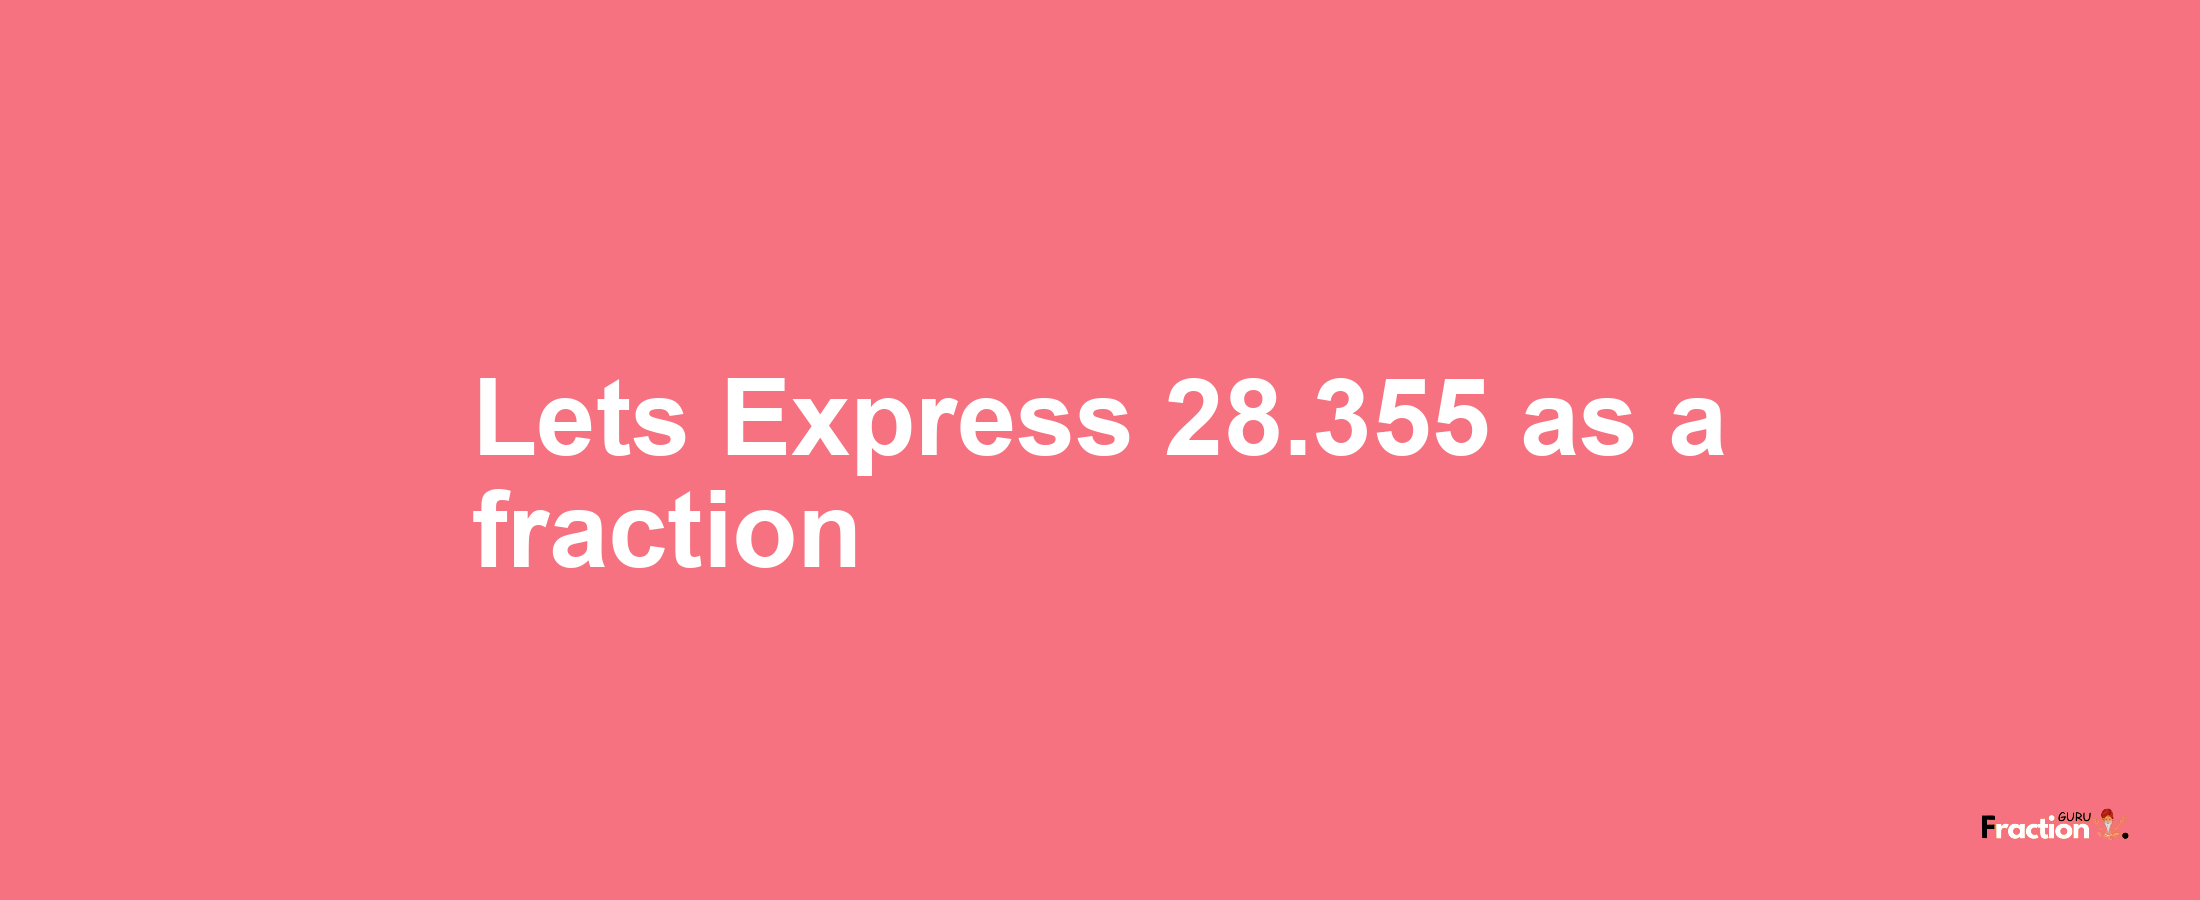 Lets Express 28.355 as afraction